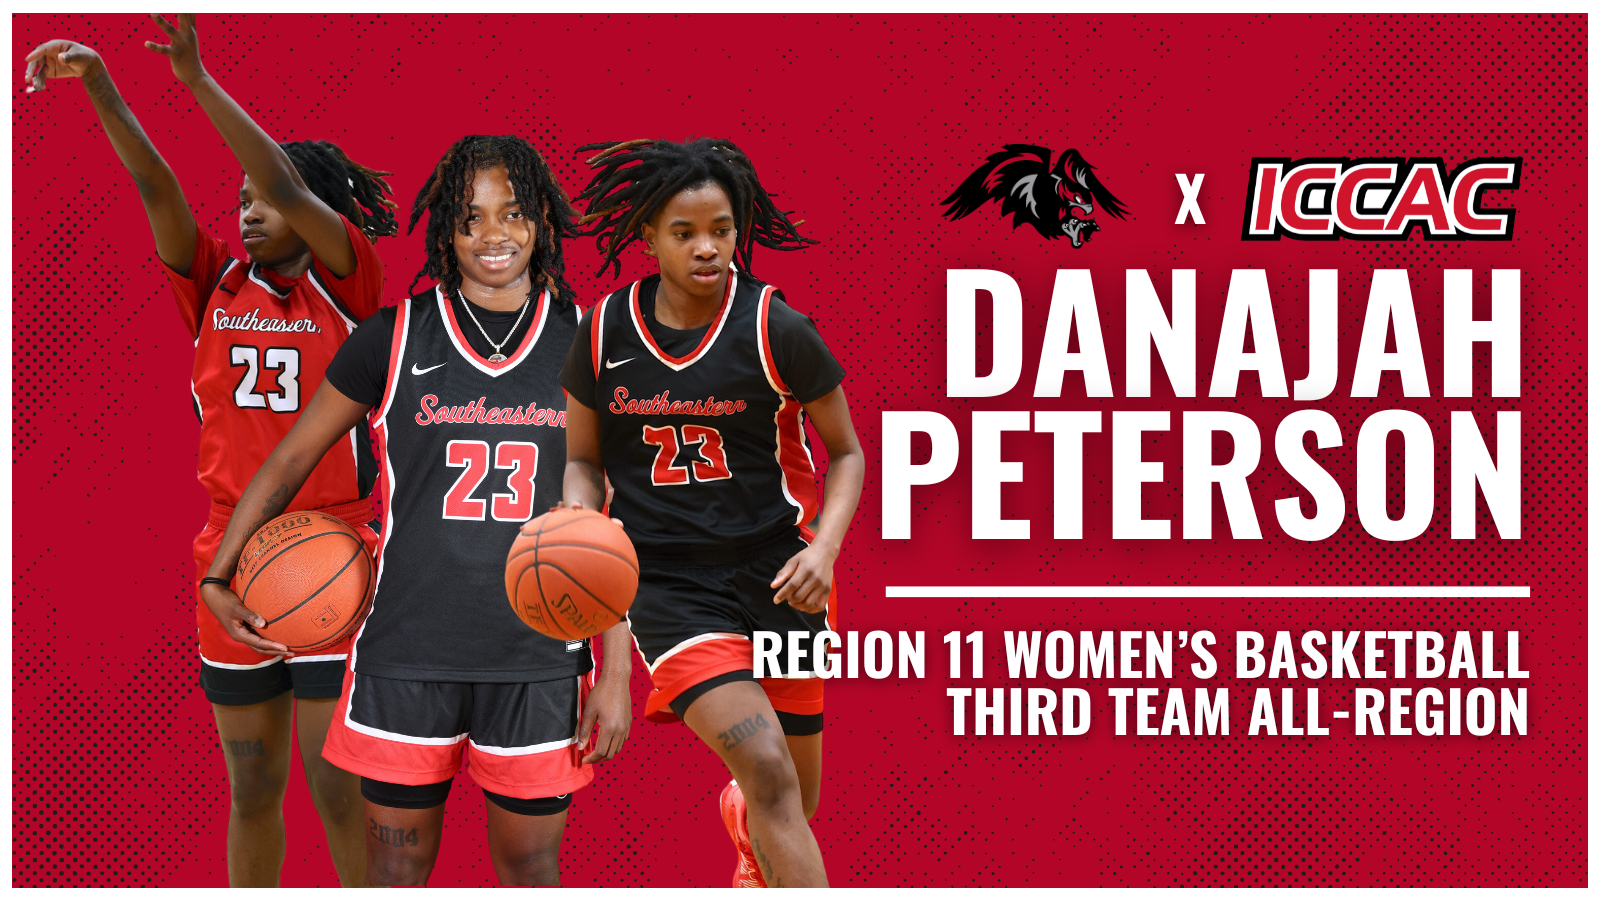 PETERSON NAMED TO REGION 11 WOMEN'S BASKETBALL THIRD TEAM